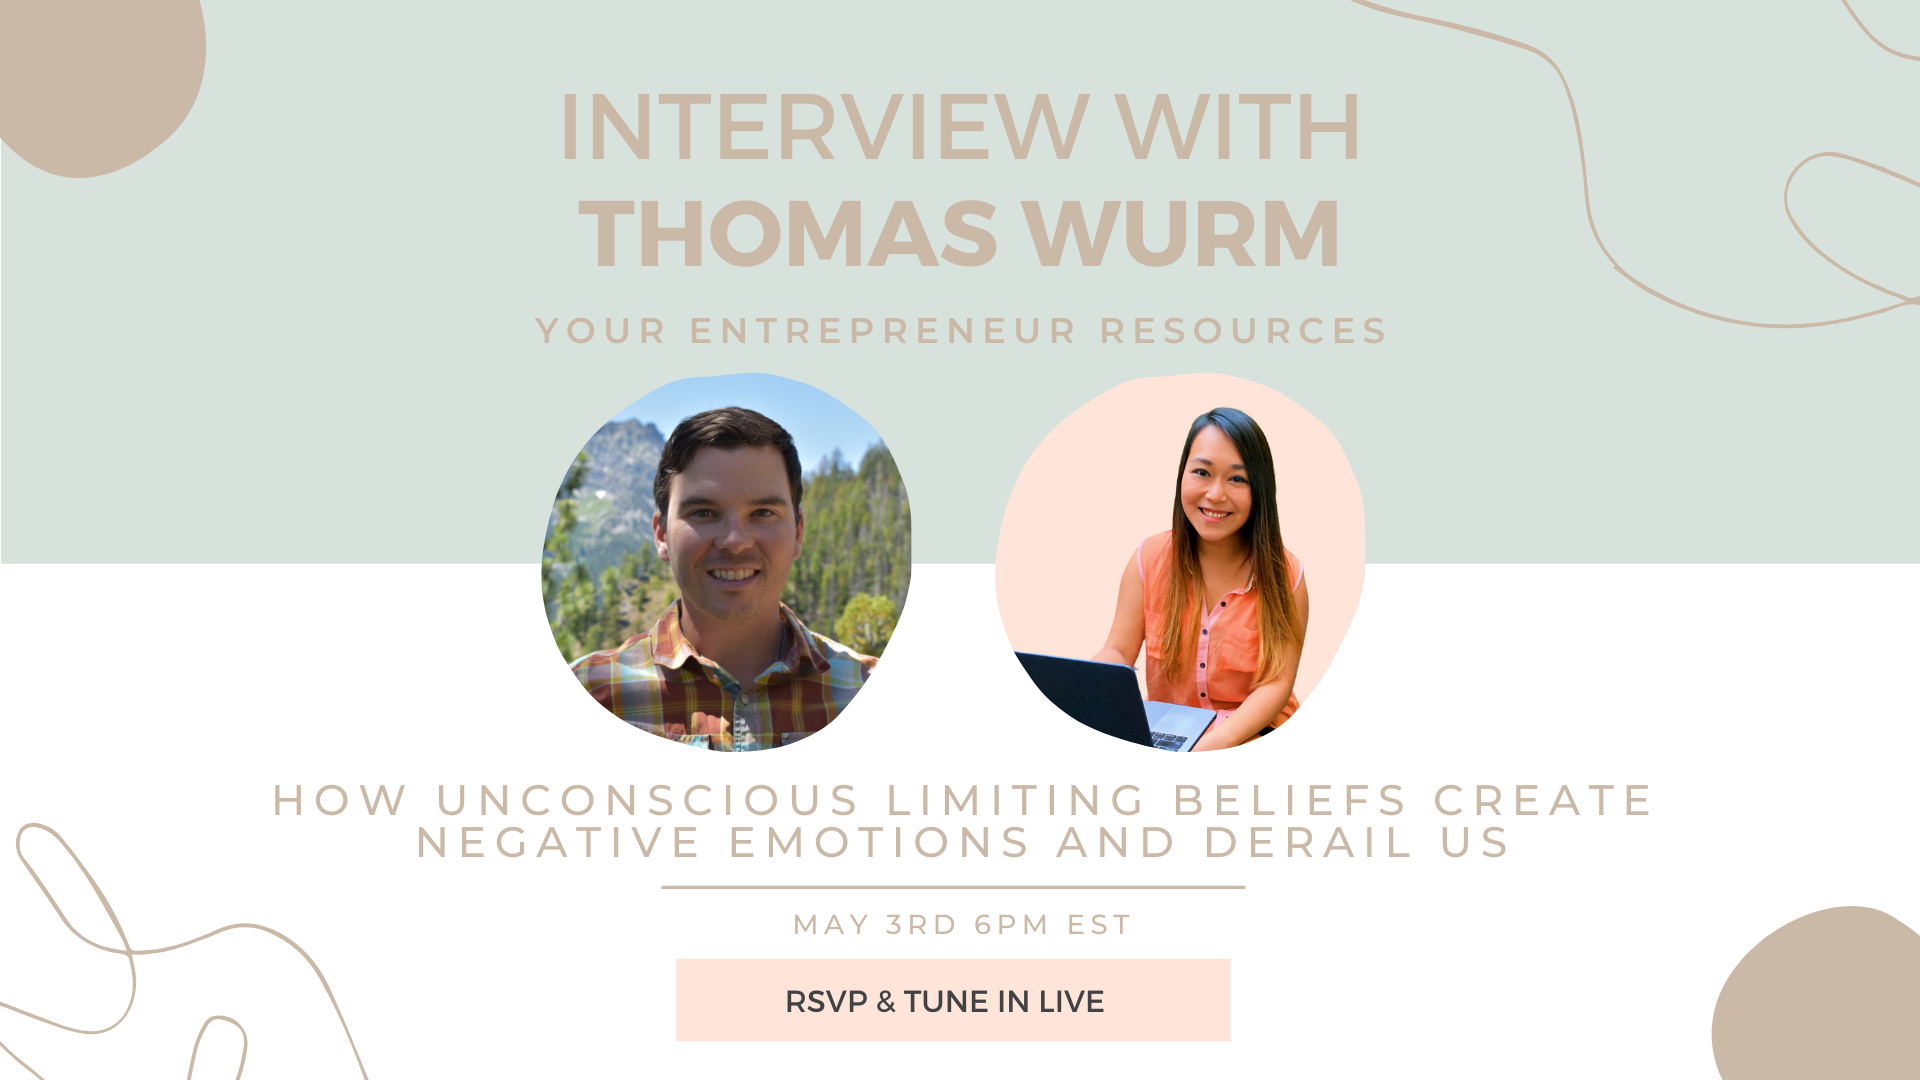 How unconscious limiting beliefs create negative emotions and derail us with Thomas Wurm